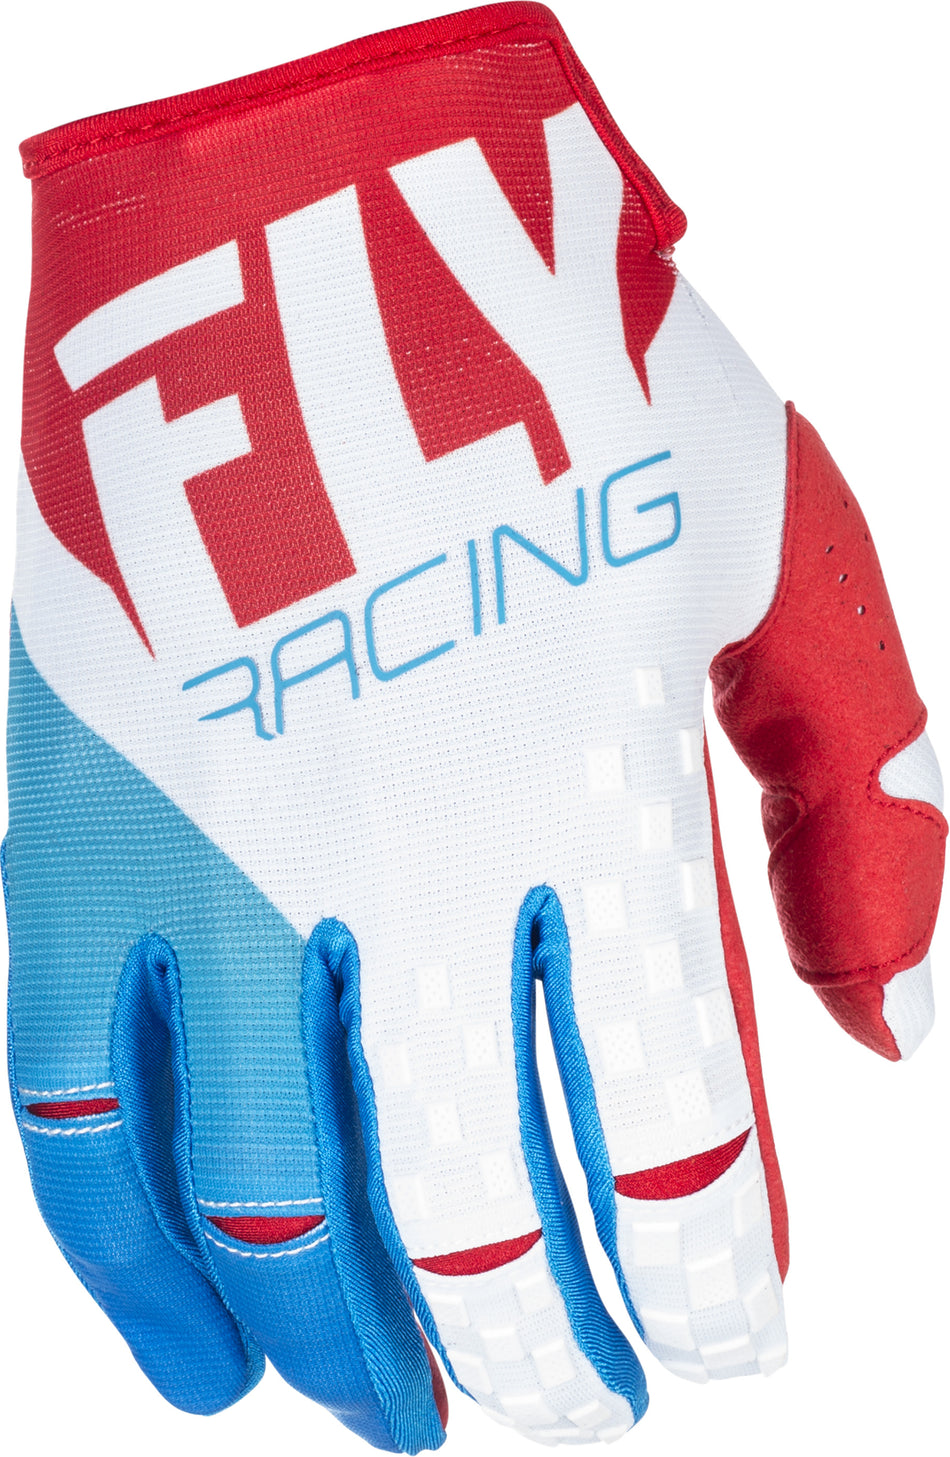 FLY RACING Kinetic Gloves Red/White/Blue Sz 5 371-41305